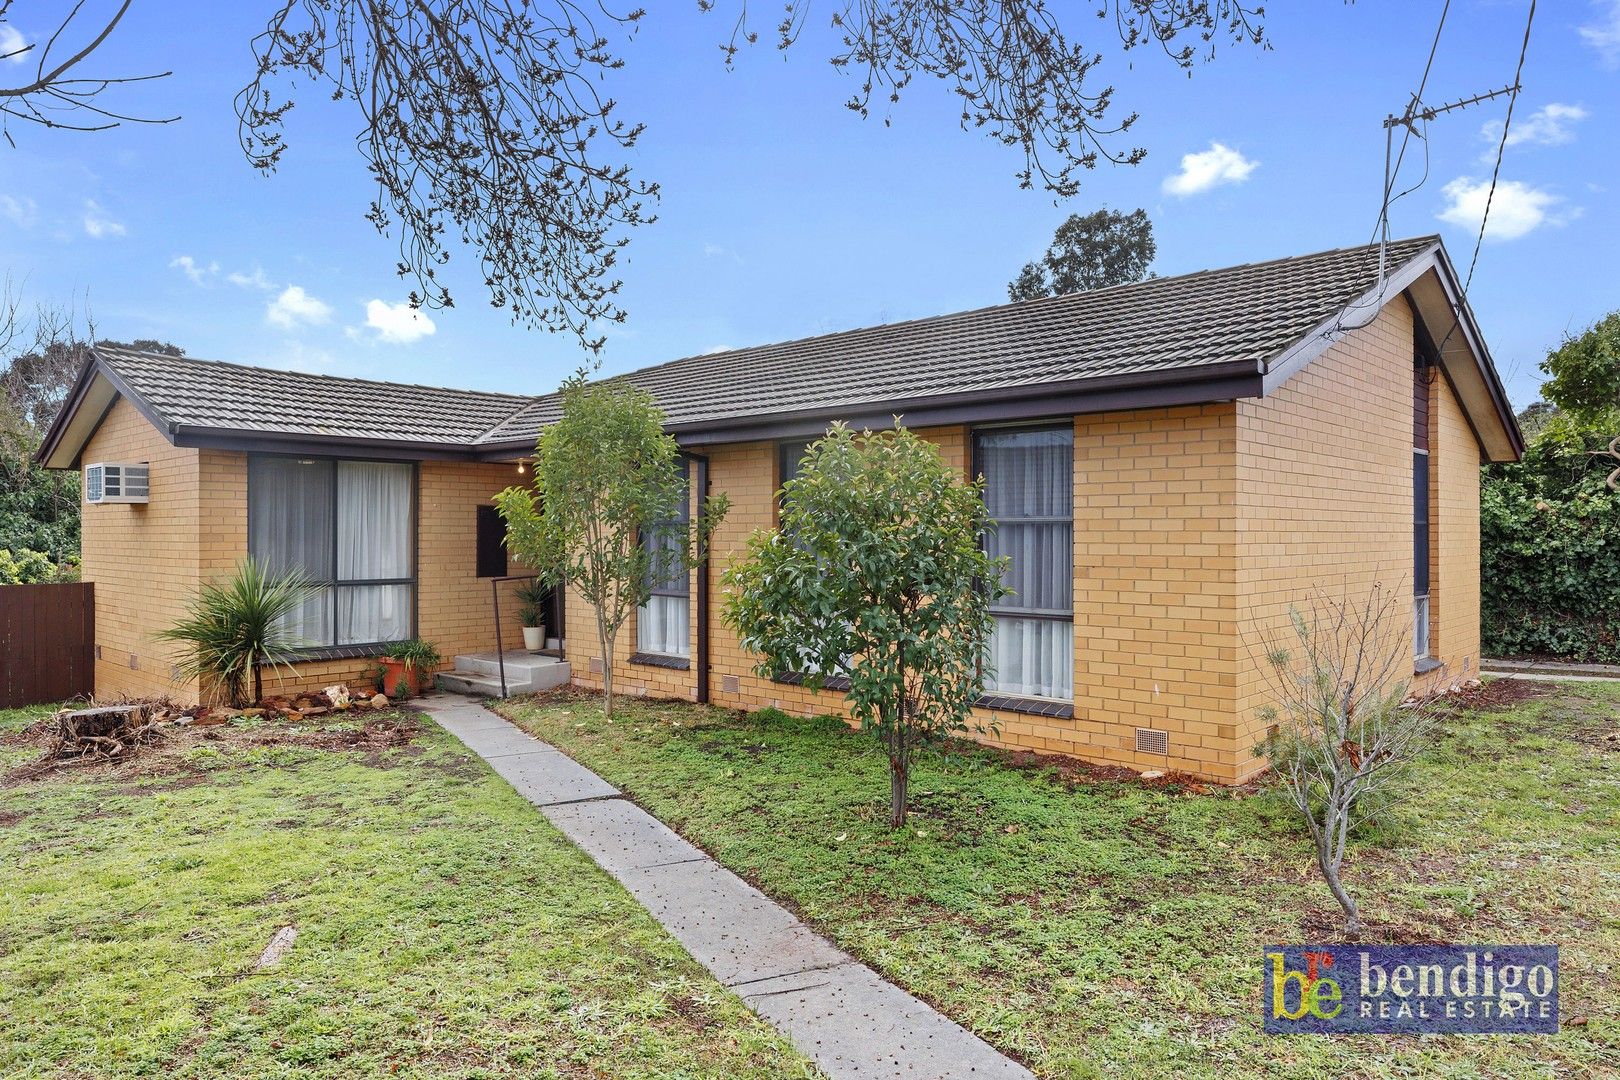 3 bedrooms House in 4 Shaft Street LONG GULLY VIC, 3550